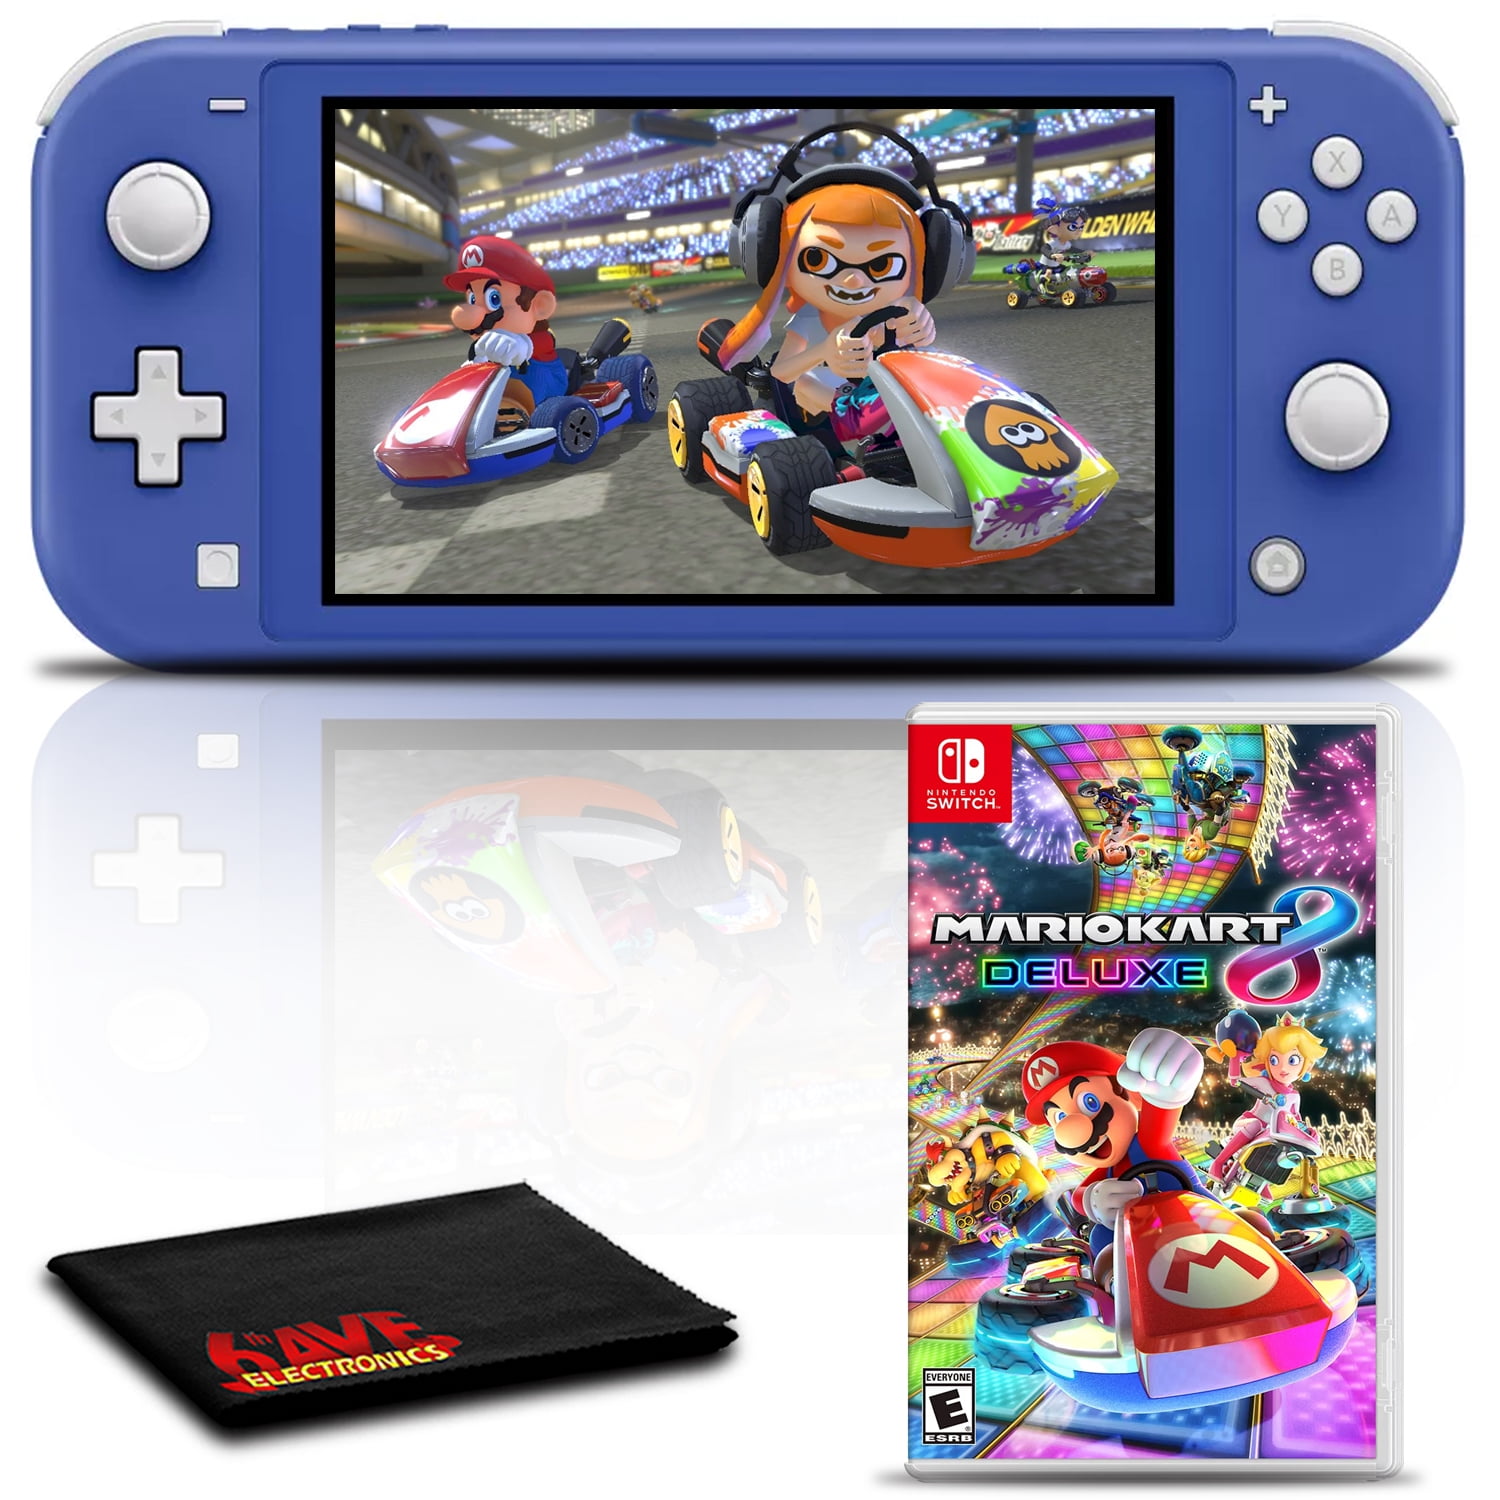 Nintendo Switch Lite (Blue) Gaming Console Bundle, Mario Kart 8 Deluxe with Friends Characters -